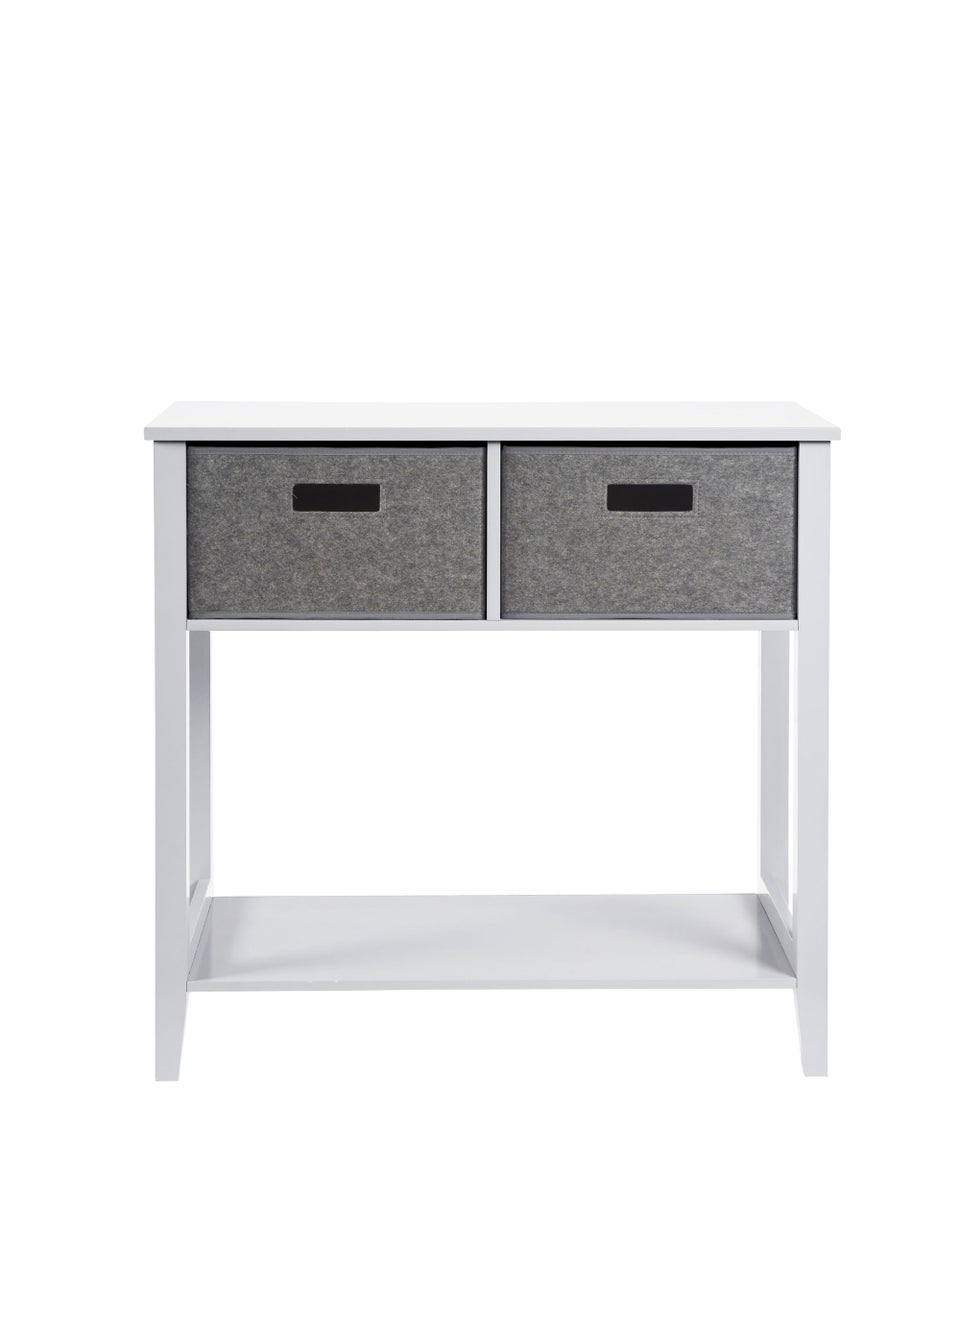 Lloyd Pascal Moor Console White with 2 Felt Drawers and Bottom Shelf